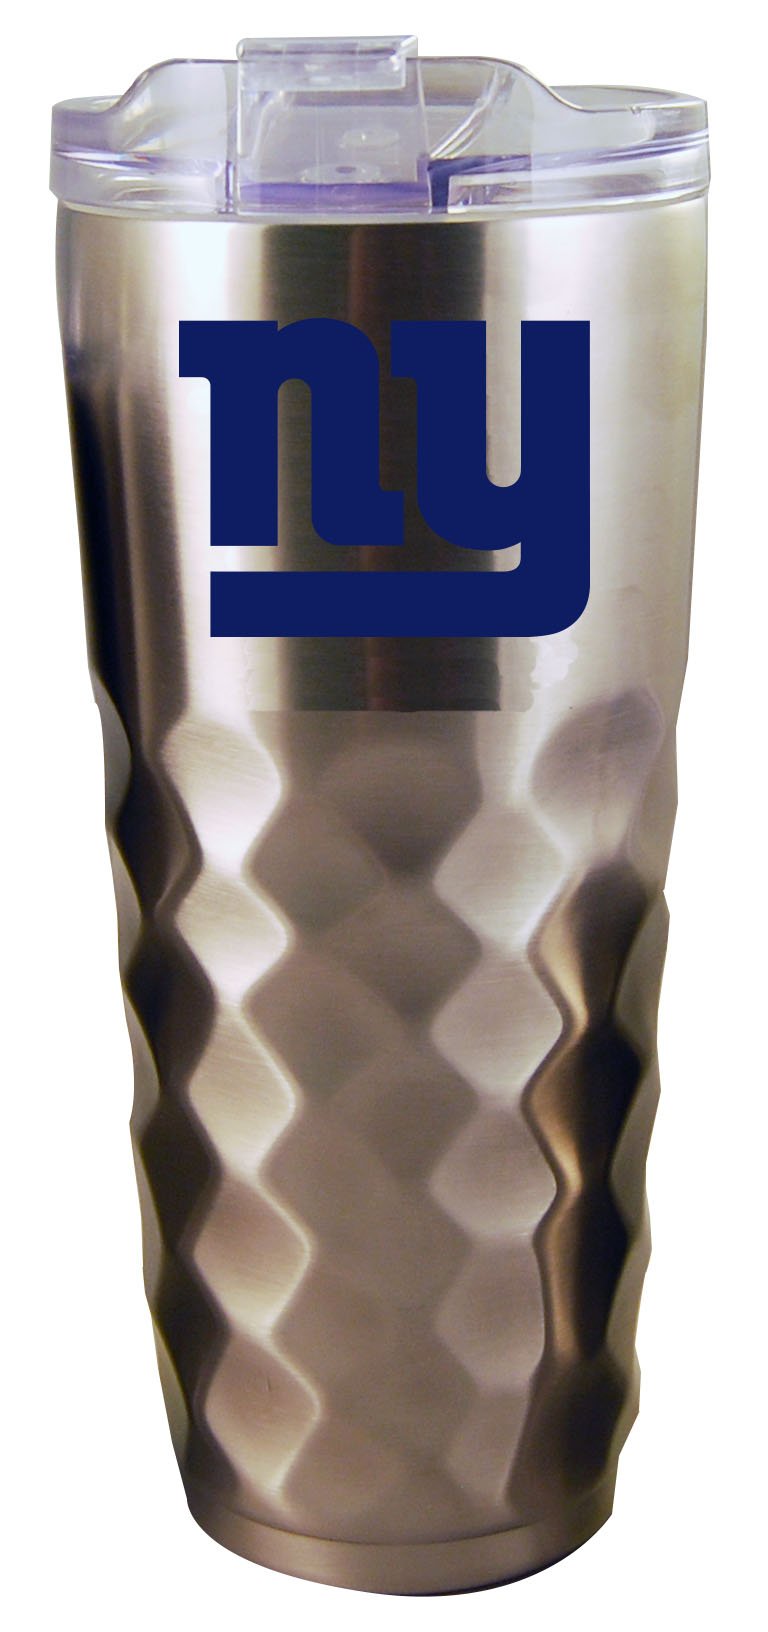 32OZ SS DIAMD TMBLR GIANTS
CurrentProduct, Drinkware_category_All, New York Giants, NFL, NYG
The Memory Company